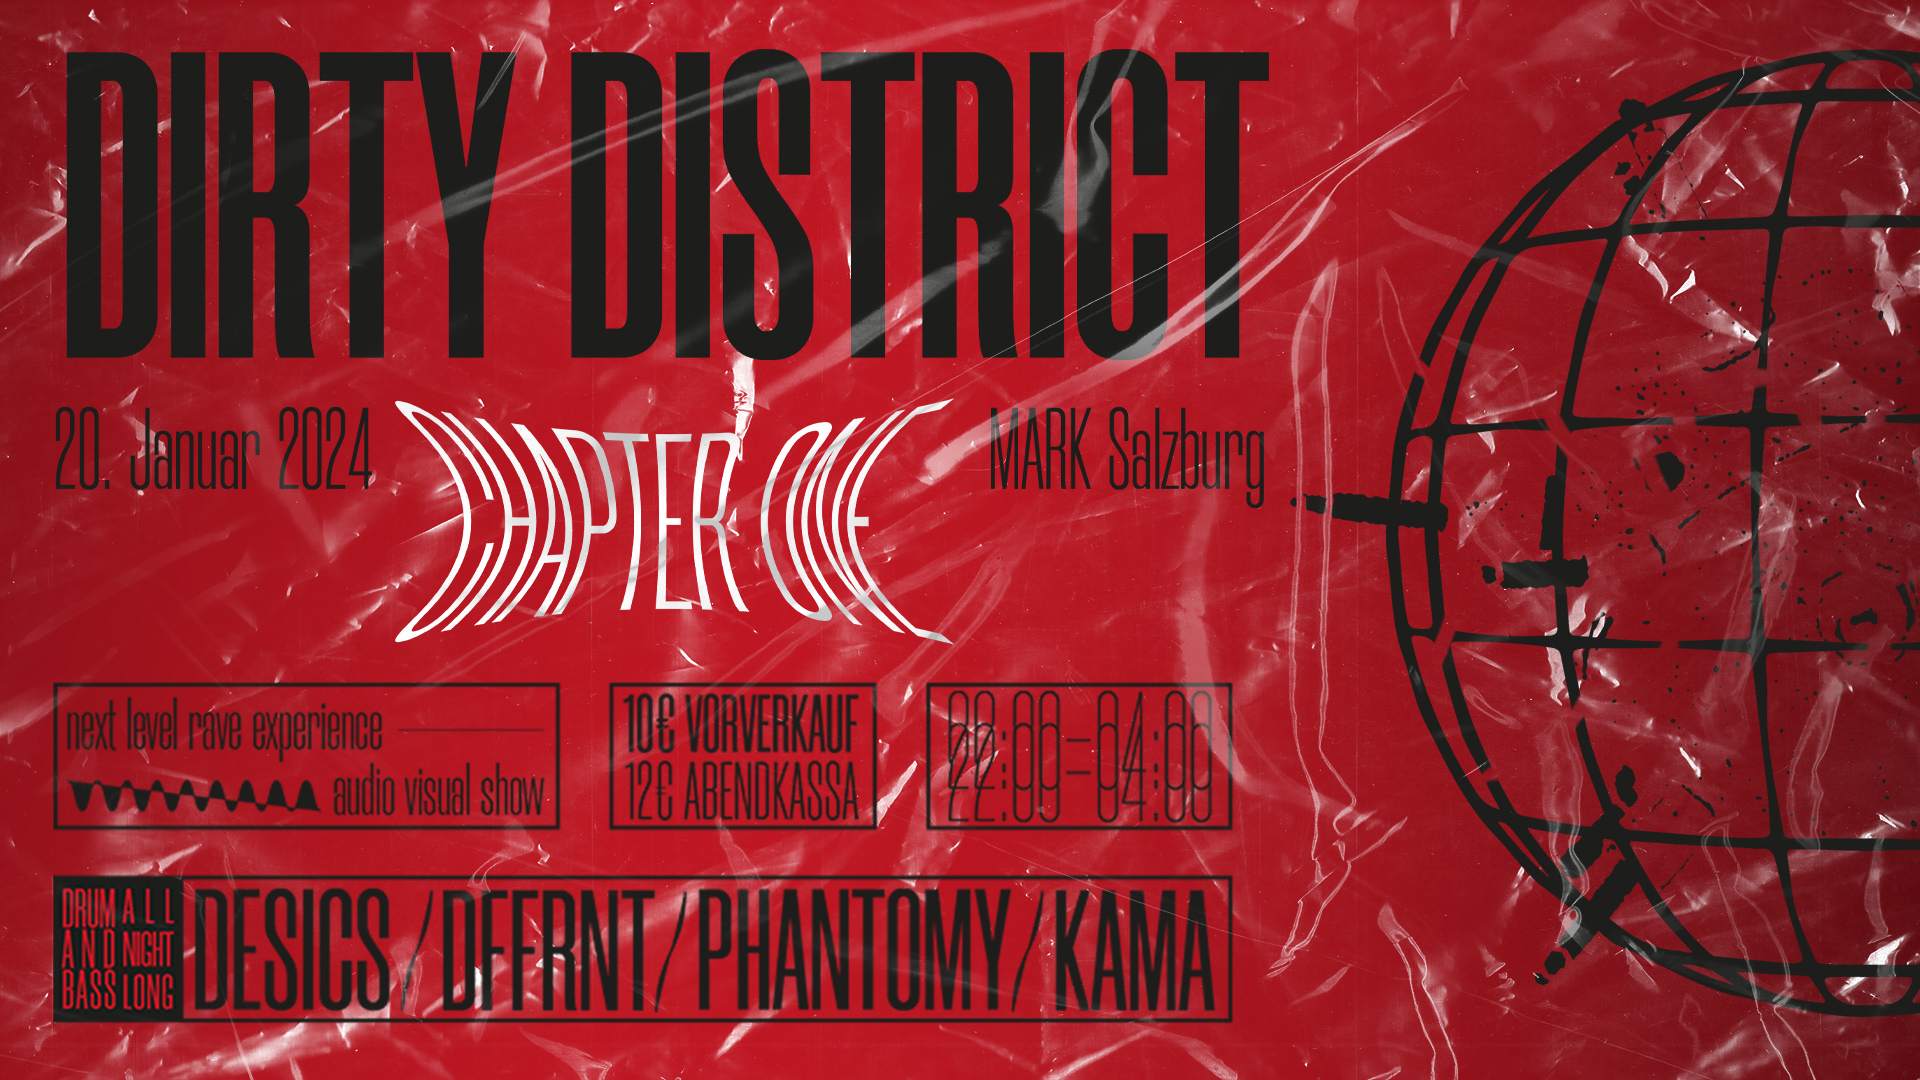 DIRTY DISTRICT - CHAPTER ONE - Página frontal